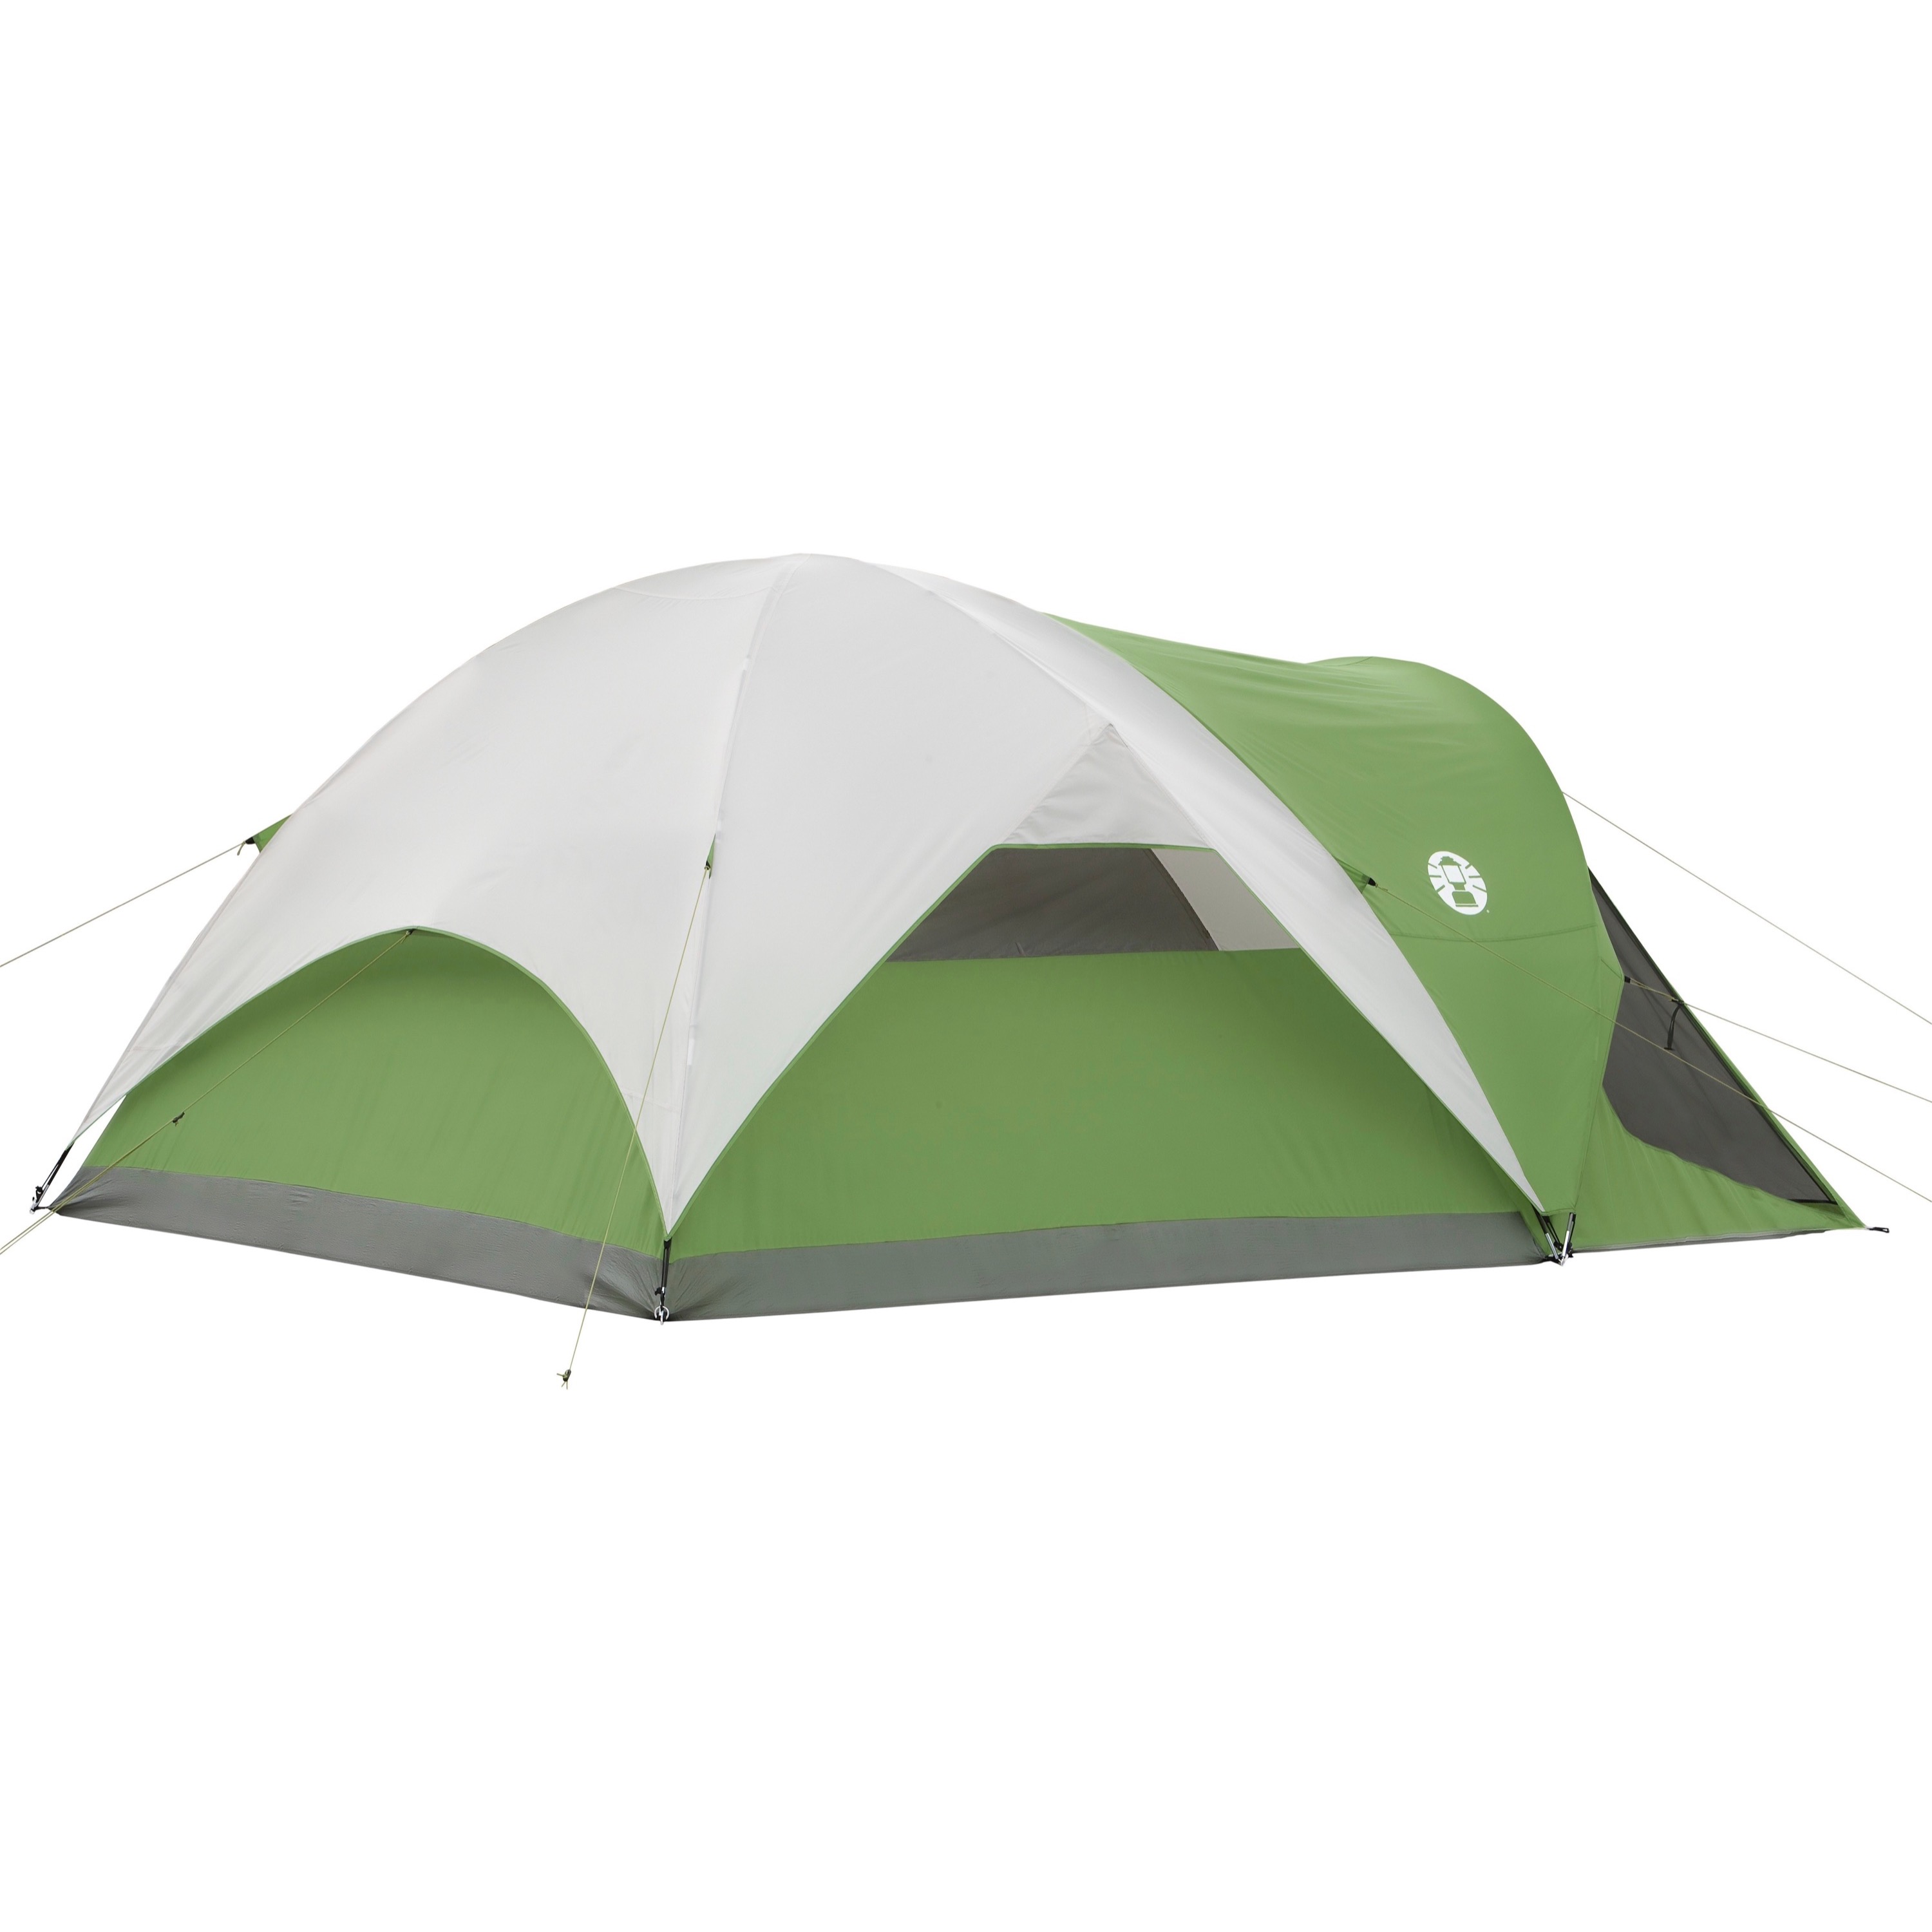 Coleman Evanston 6-Person Dome Tent with Screen Room, 2 Rooms, Green - image 2 of 9